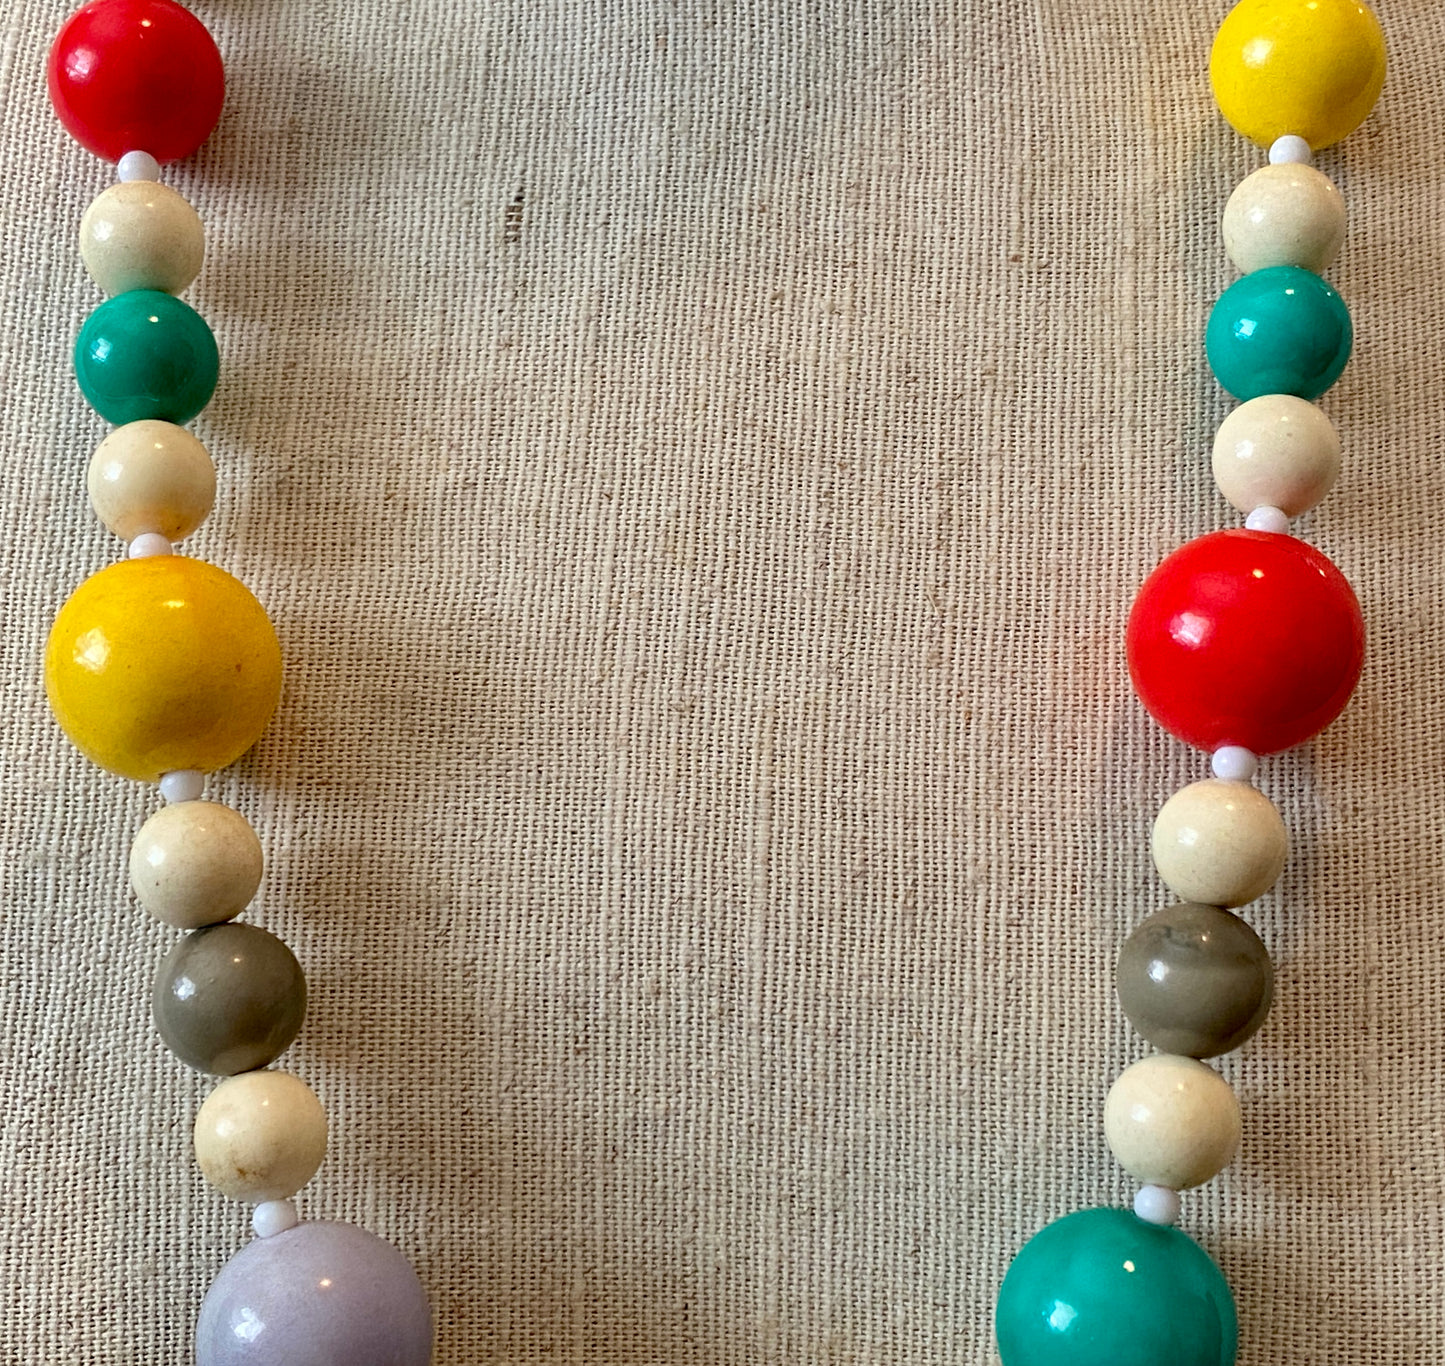 Vintage Chunky Lacquered Wood Bead Strand Necklace